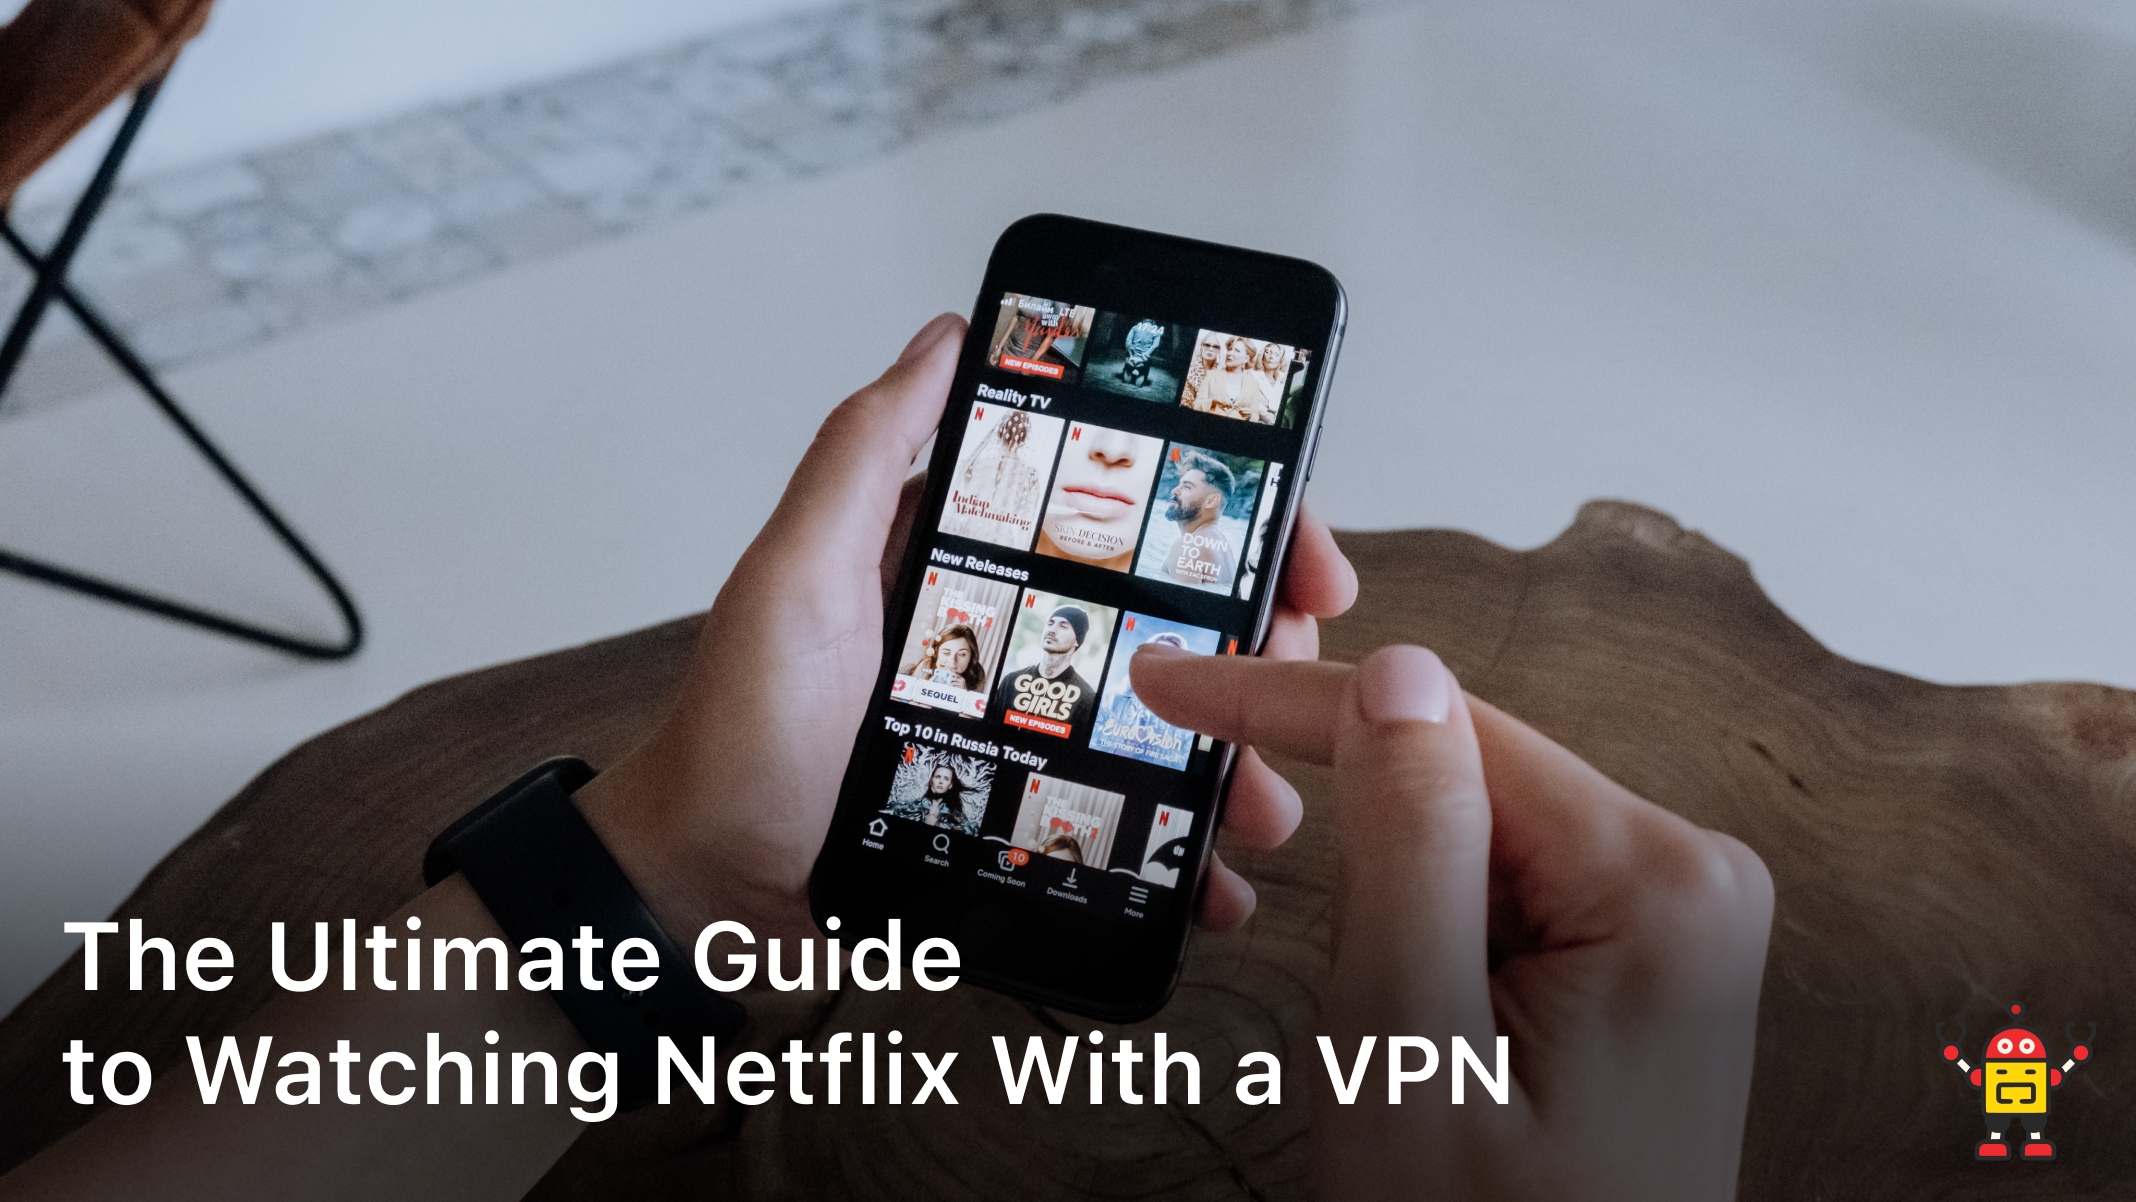 The Ultimate Guide to Watching Netflix With a VPN